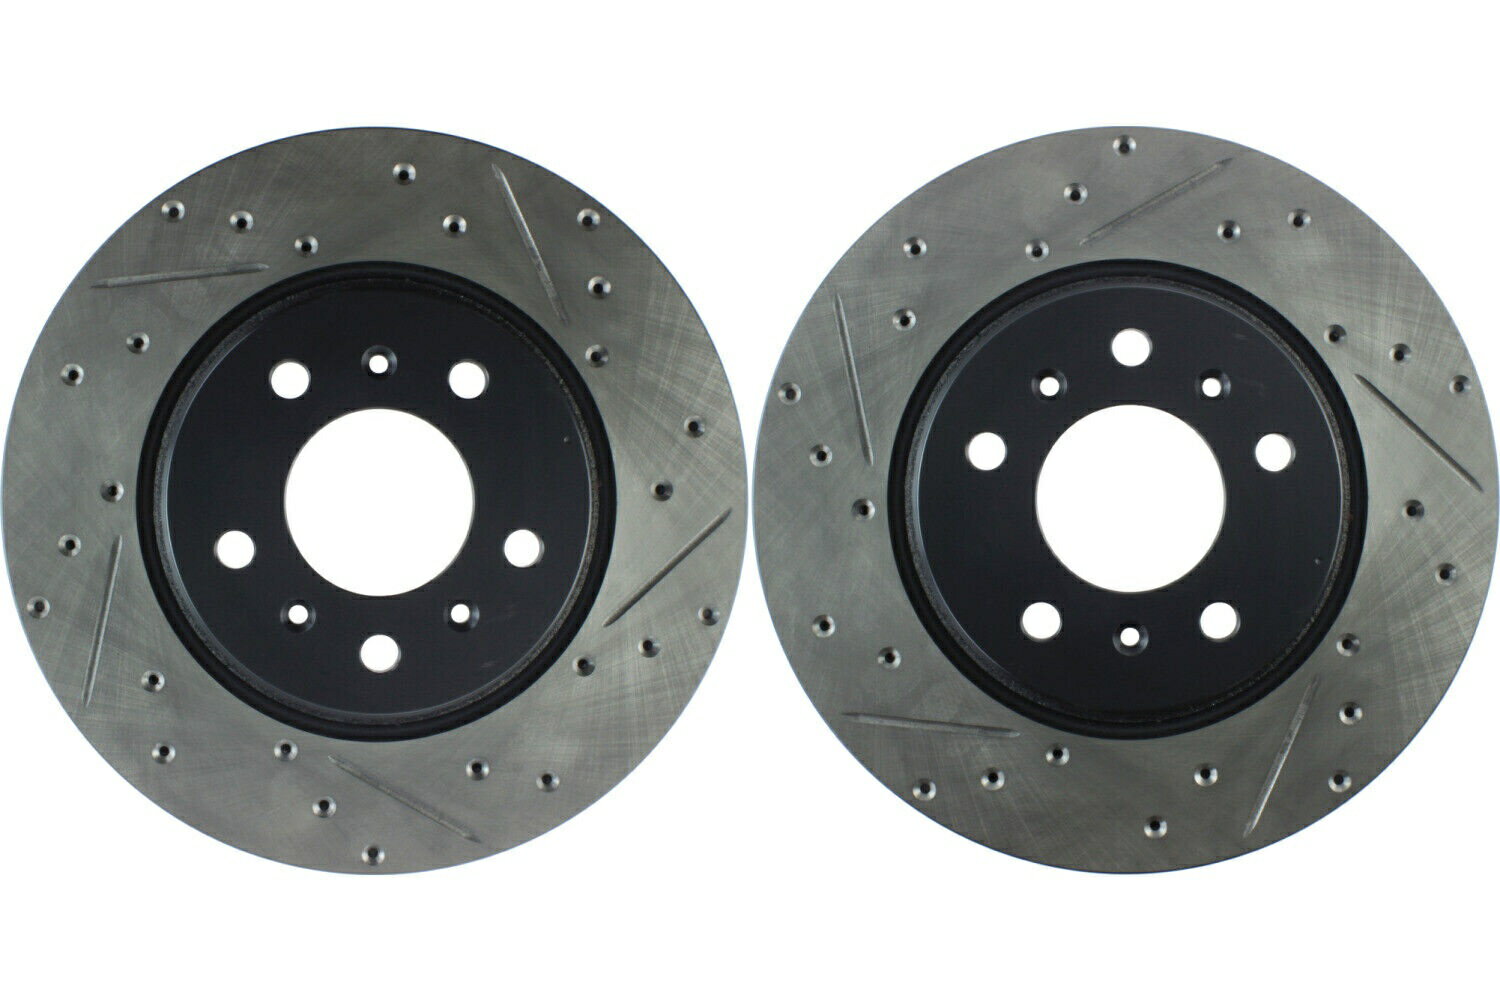 brake disc rotor 2005年のポンティアックモンタナのフロントペアストップテックディスクブレーキローター（46933） Front PAIR Stoptech Disc Brake Rotor for 2005 Pontiac Montana (46933)